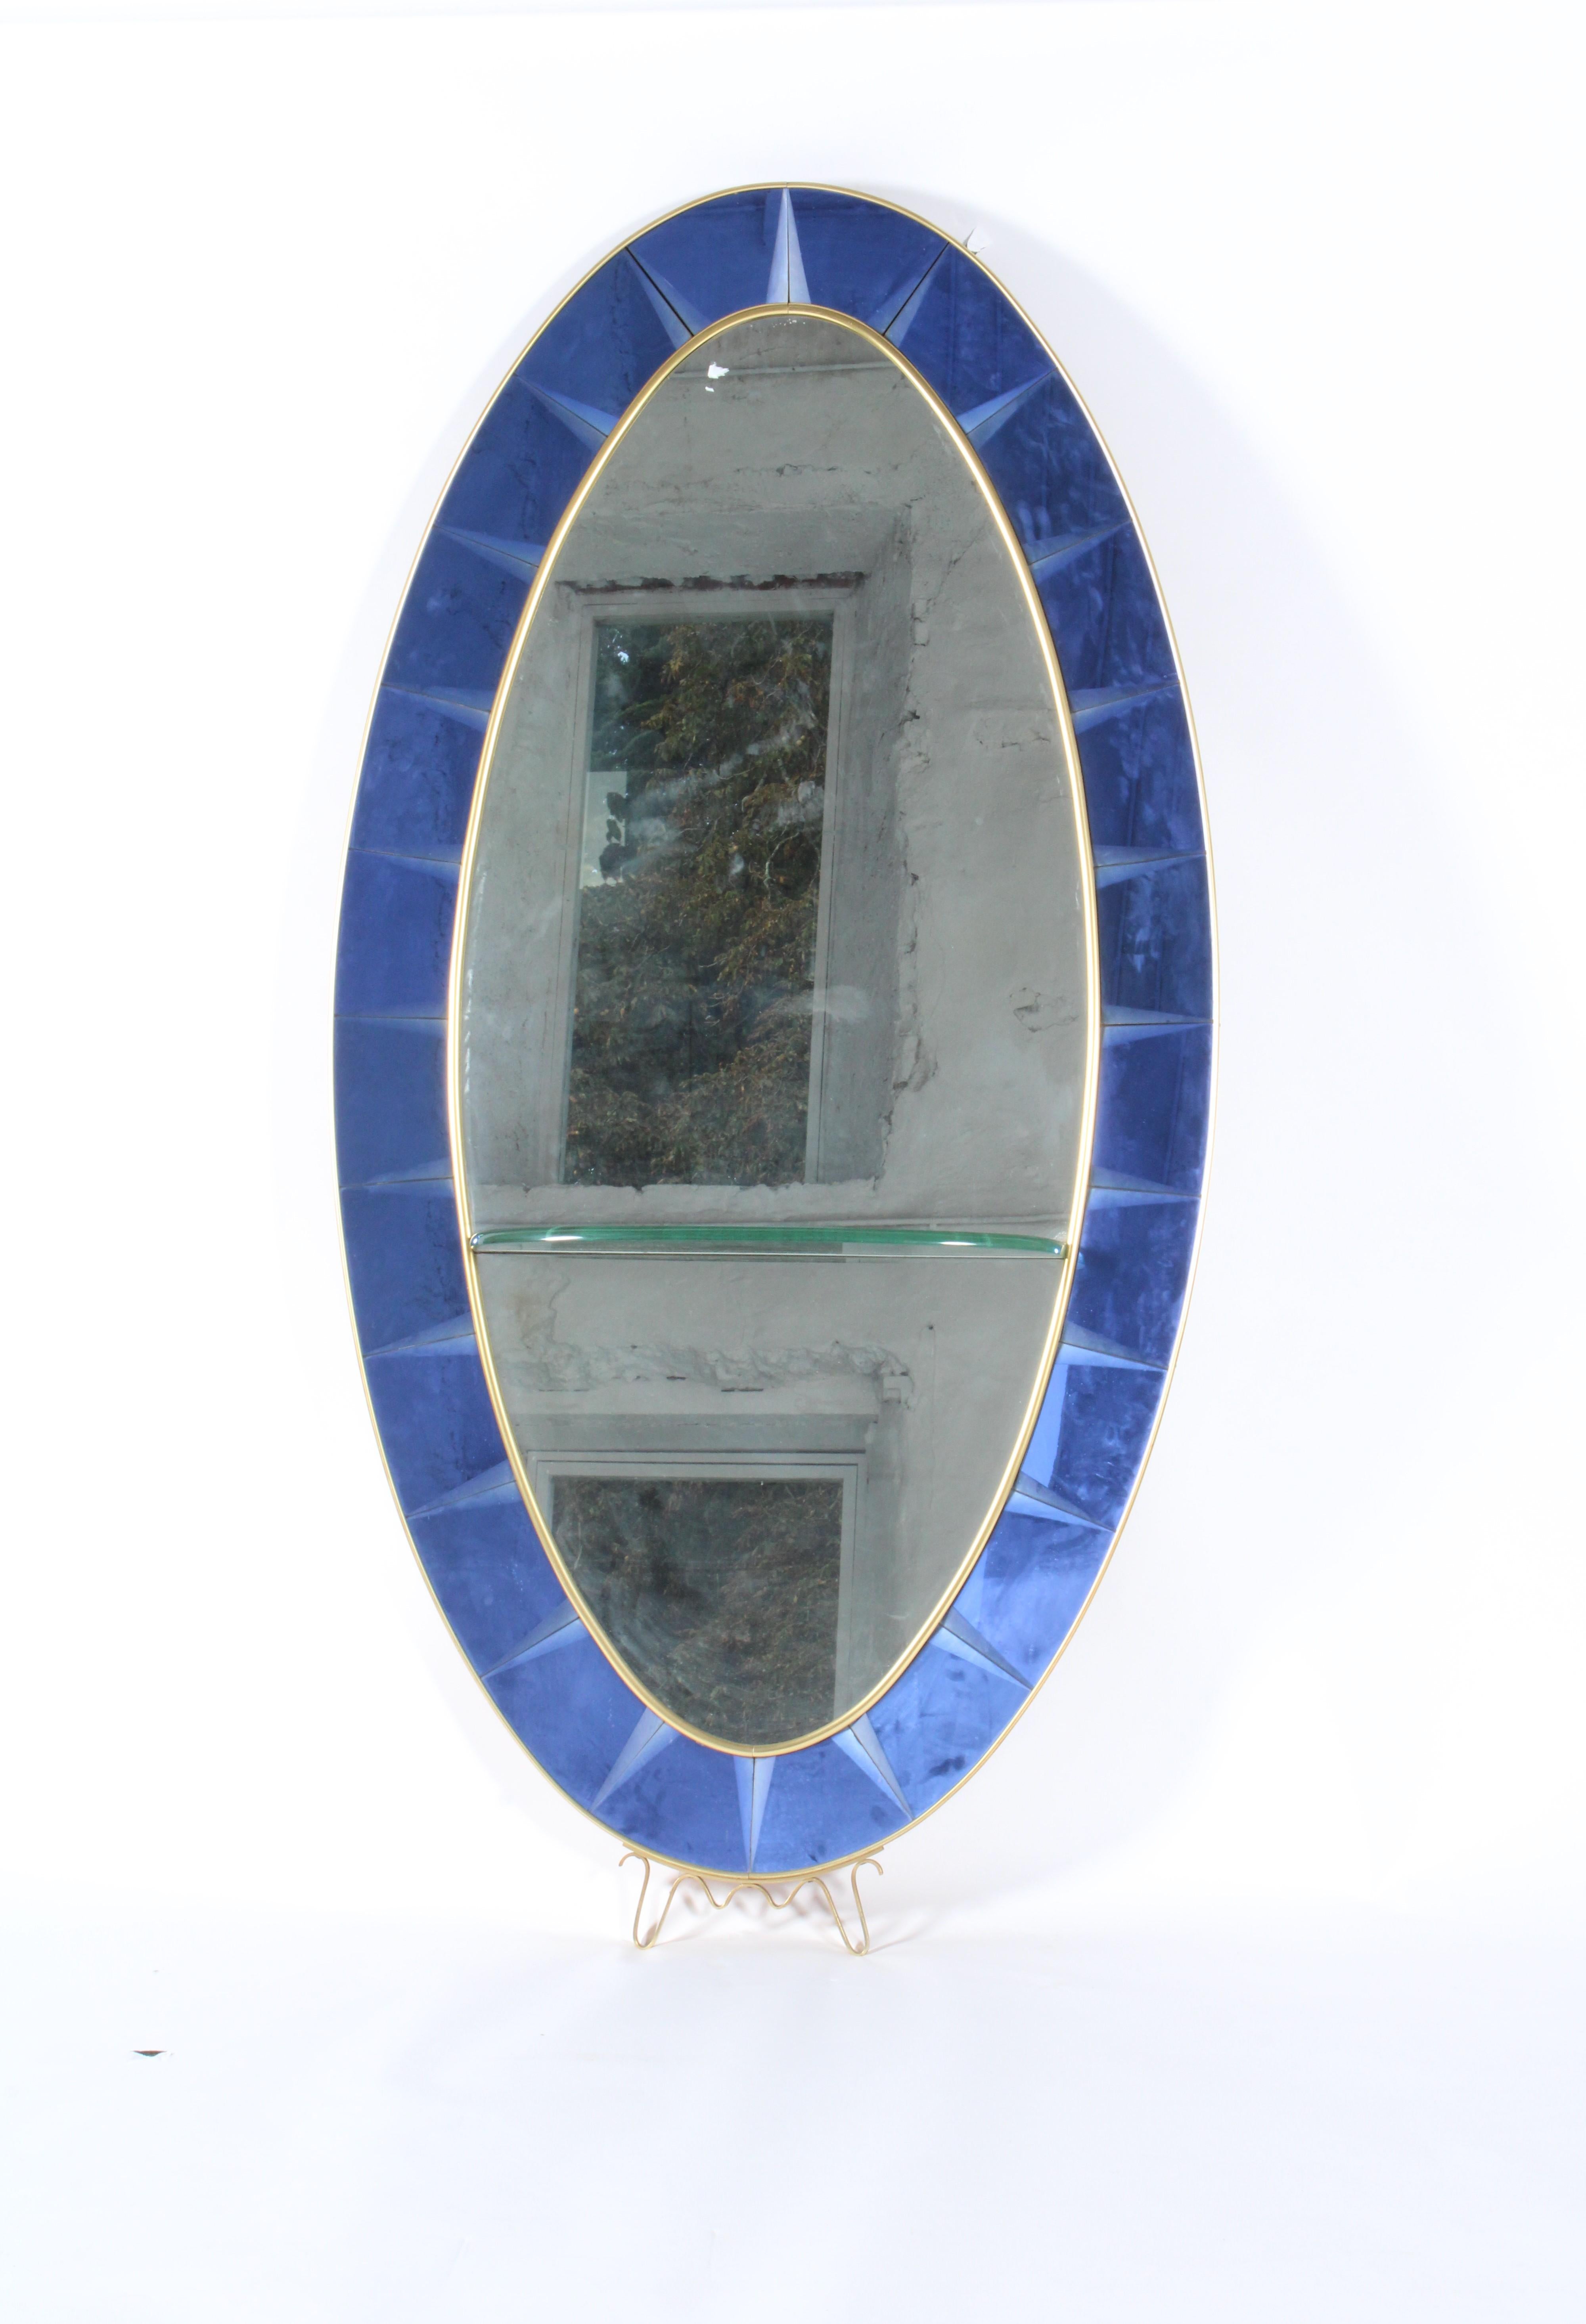  The epitome of mid century Italian style and sophistication we are delighted to present for sale this outstanding mirror by Cristal Arte of Torino. Sourced directly from a private collection in Turin, Italy this example is presented in untouched